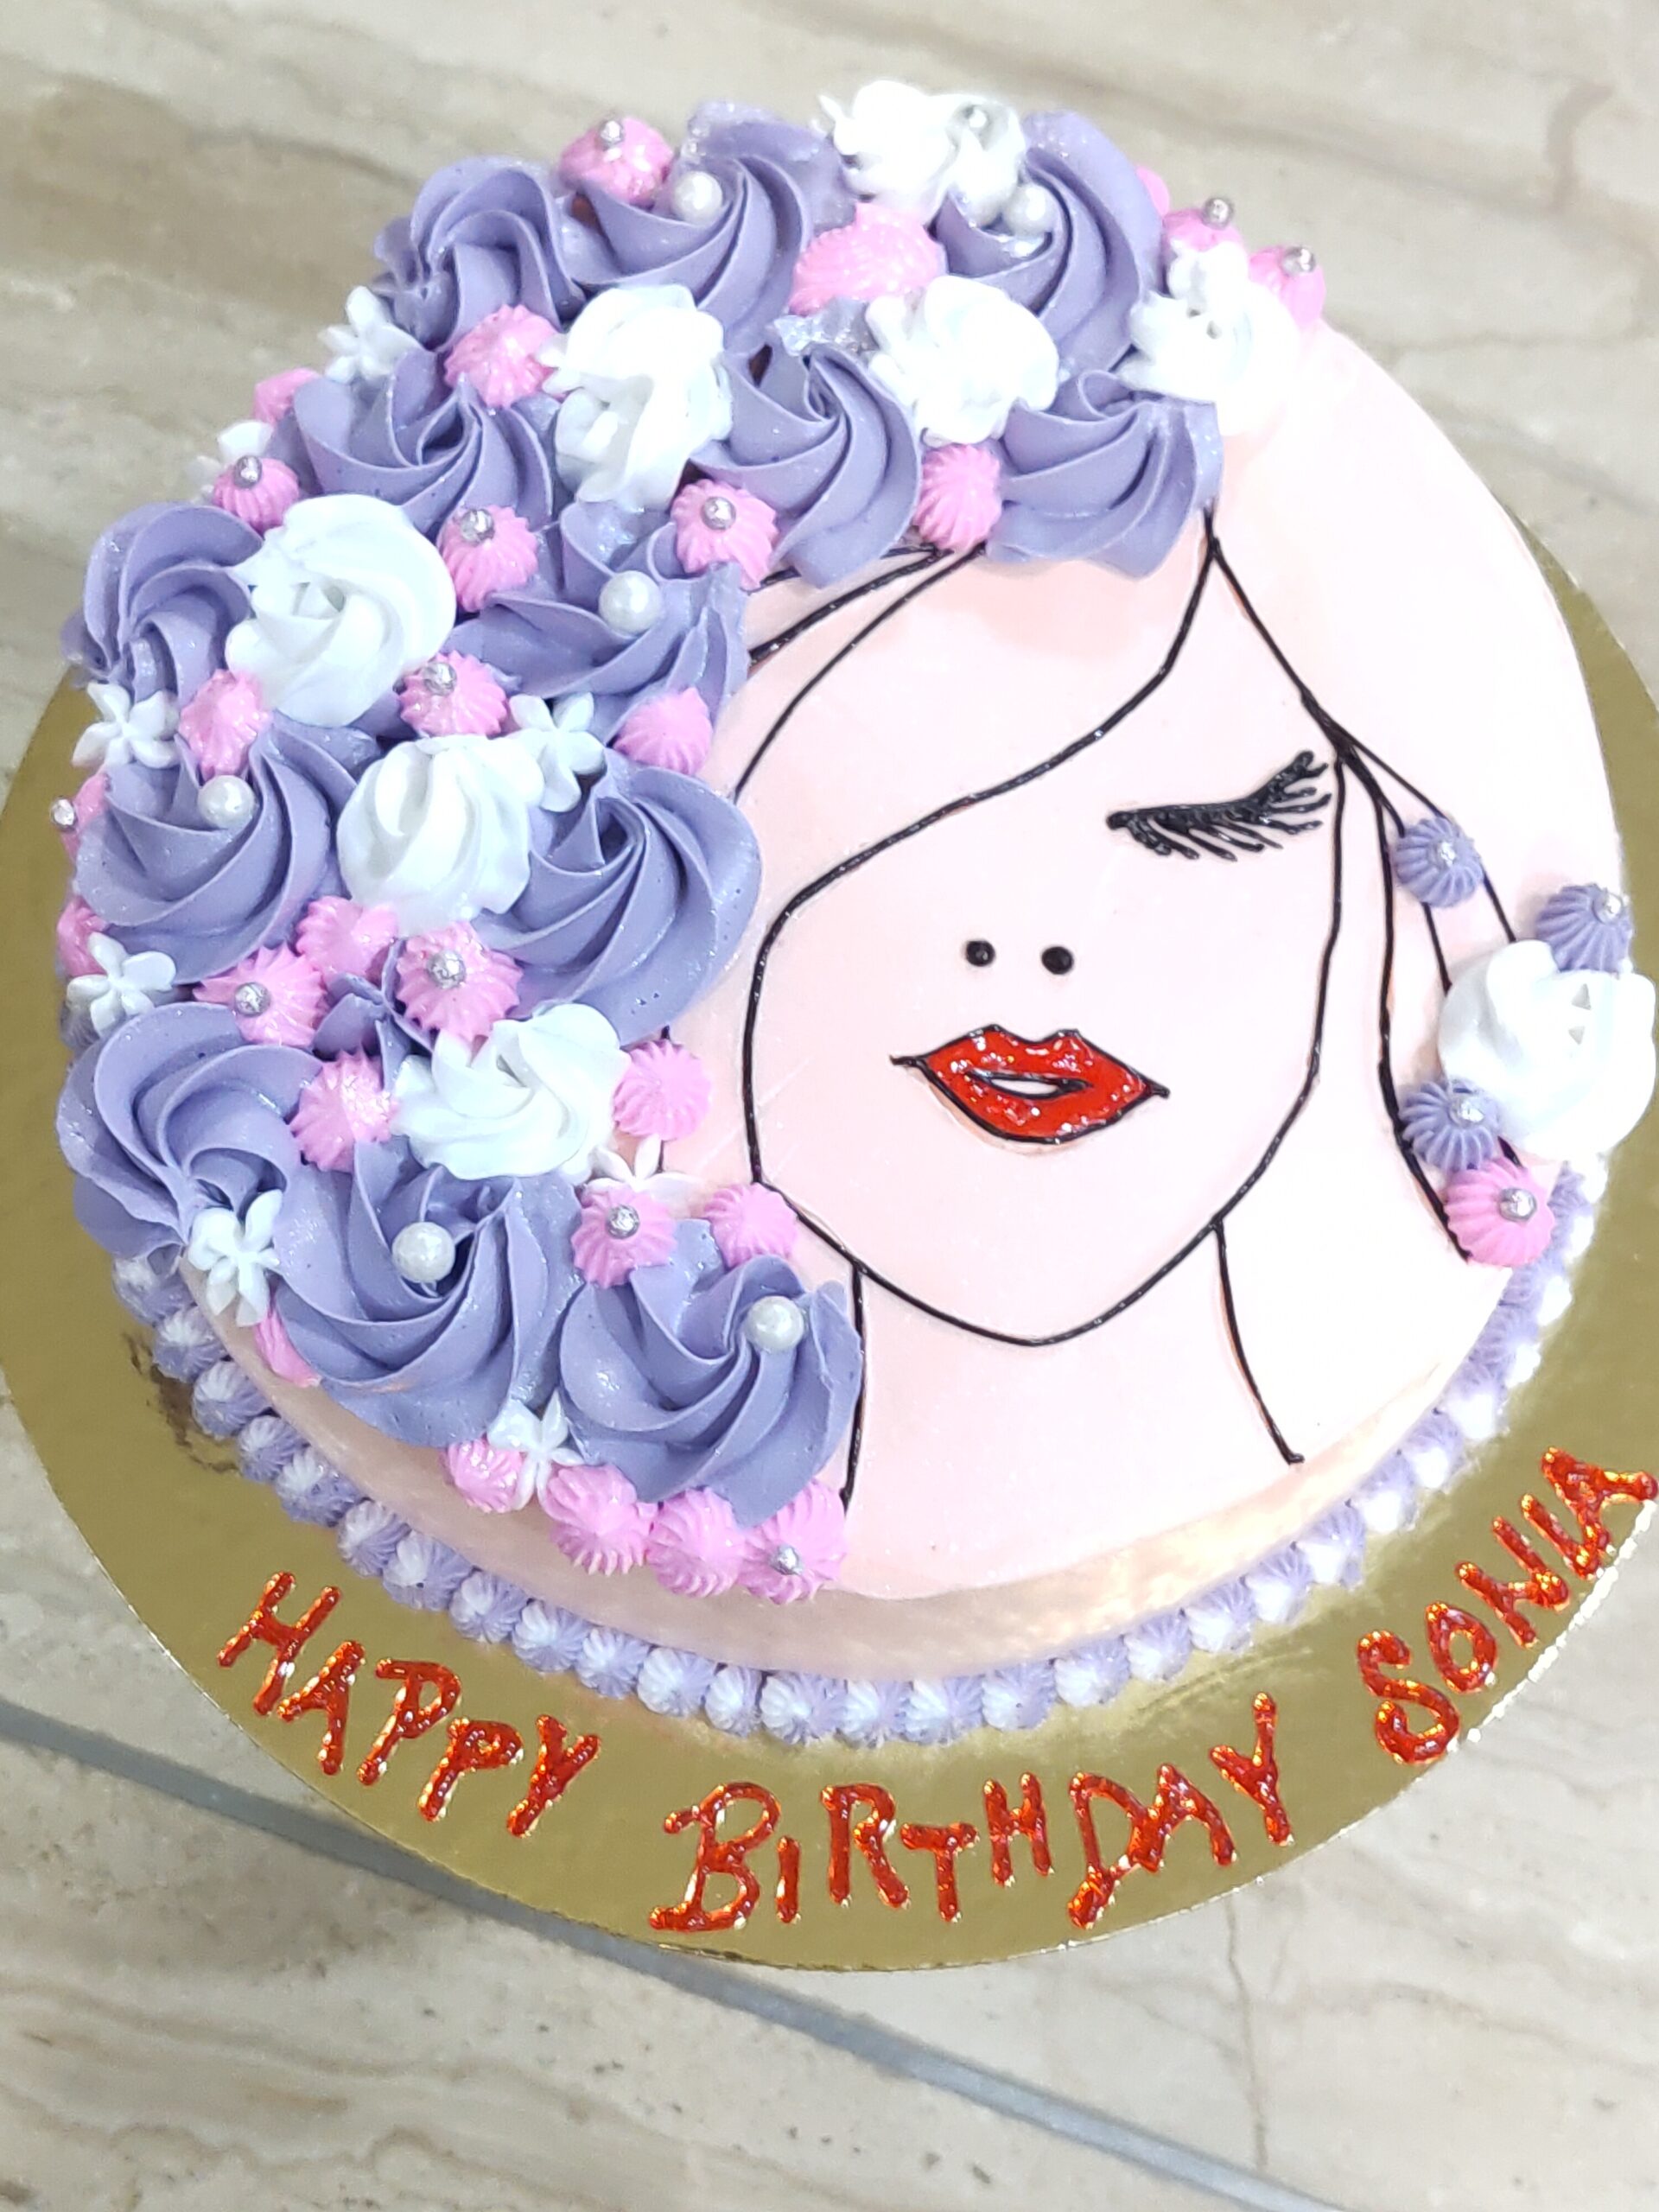 Womens Day Special Cake | Cake online, Mothers day cake, Cake